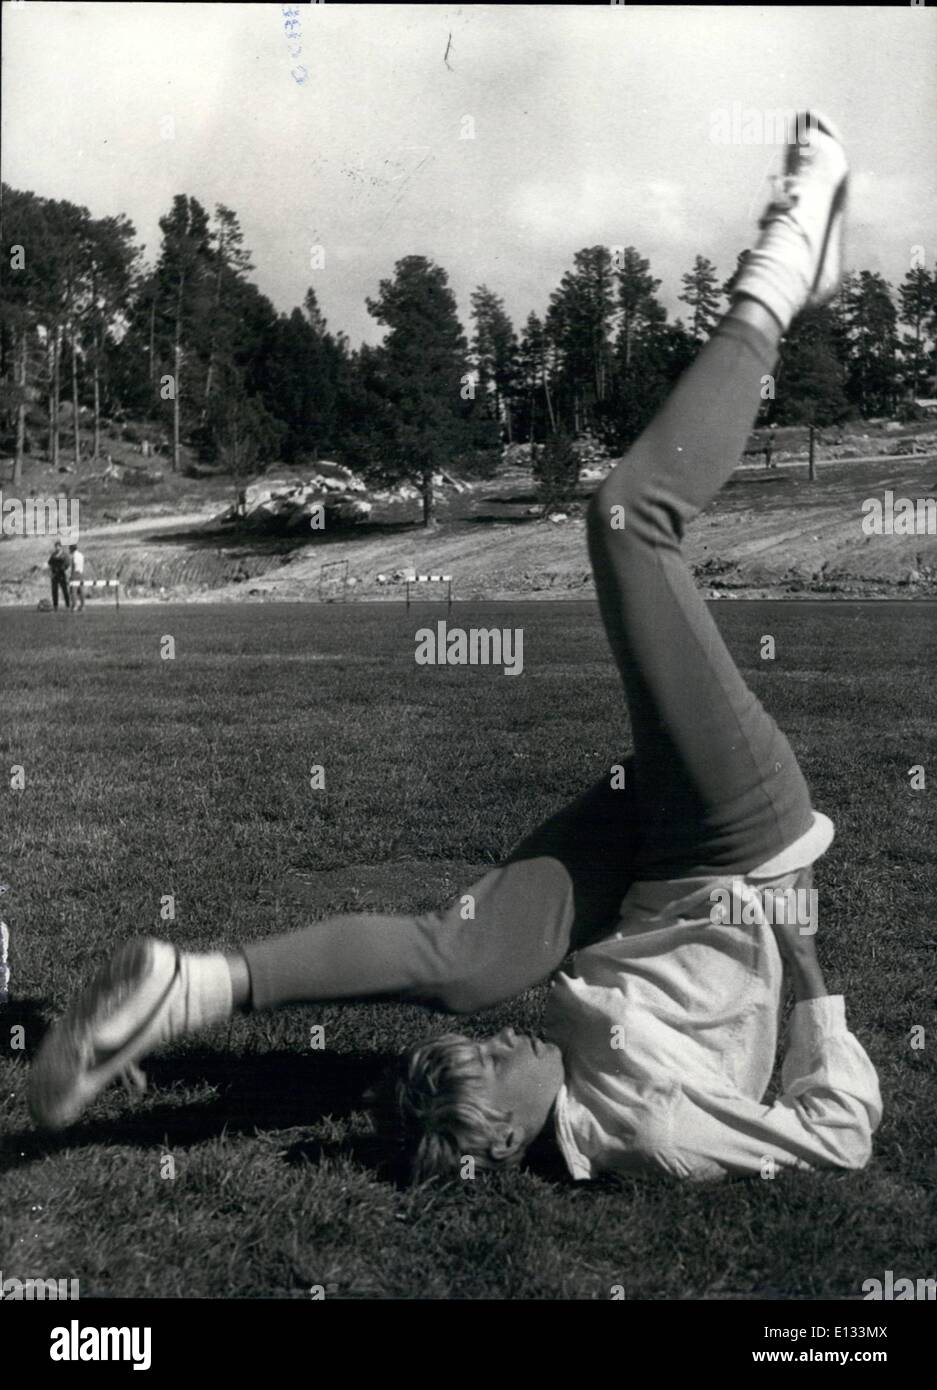 Feb. 26, 2012 - Mary Rand Keeps Fit In The Alps Mary Rand doing one of her physical exercises on the track at Font Romeu, in the French Alps. Stock Photo